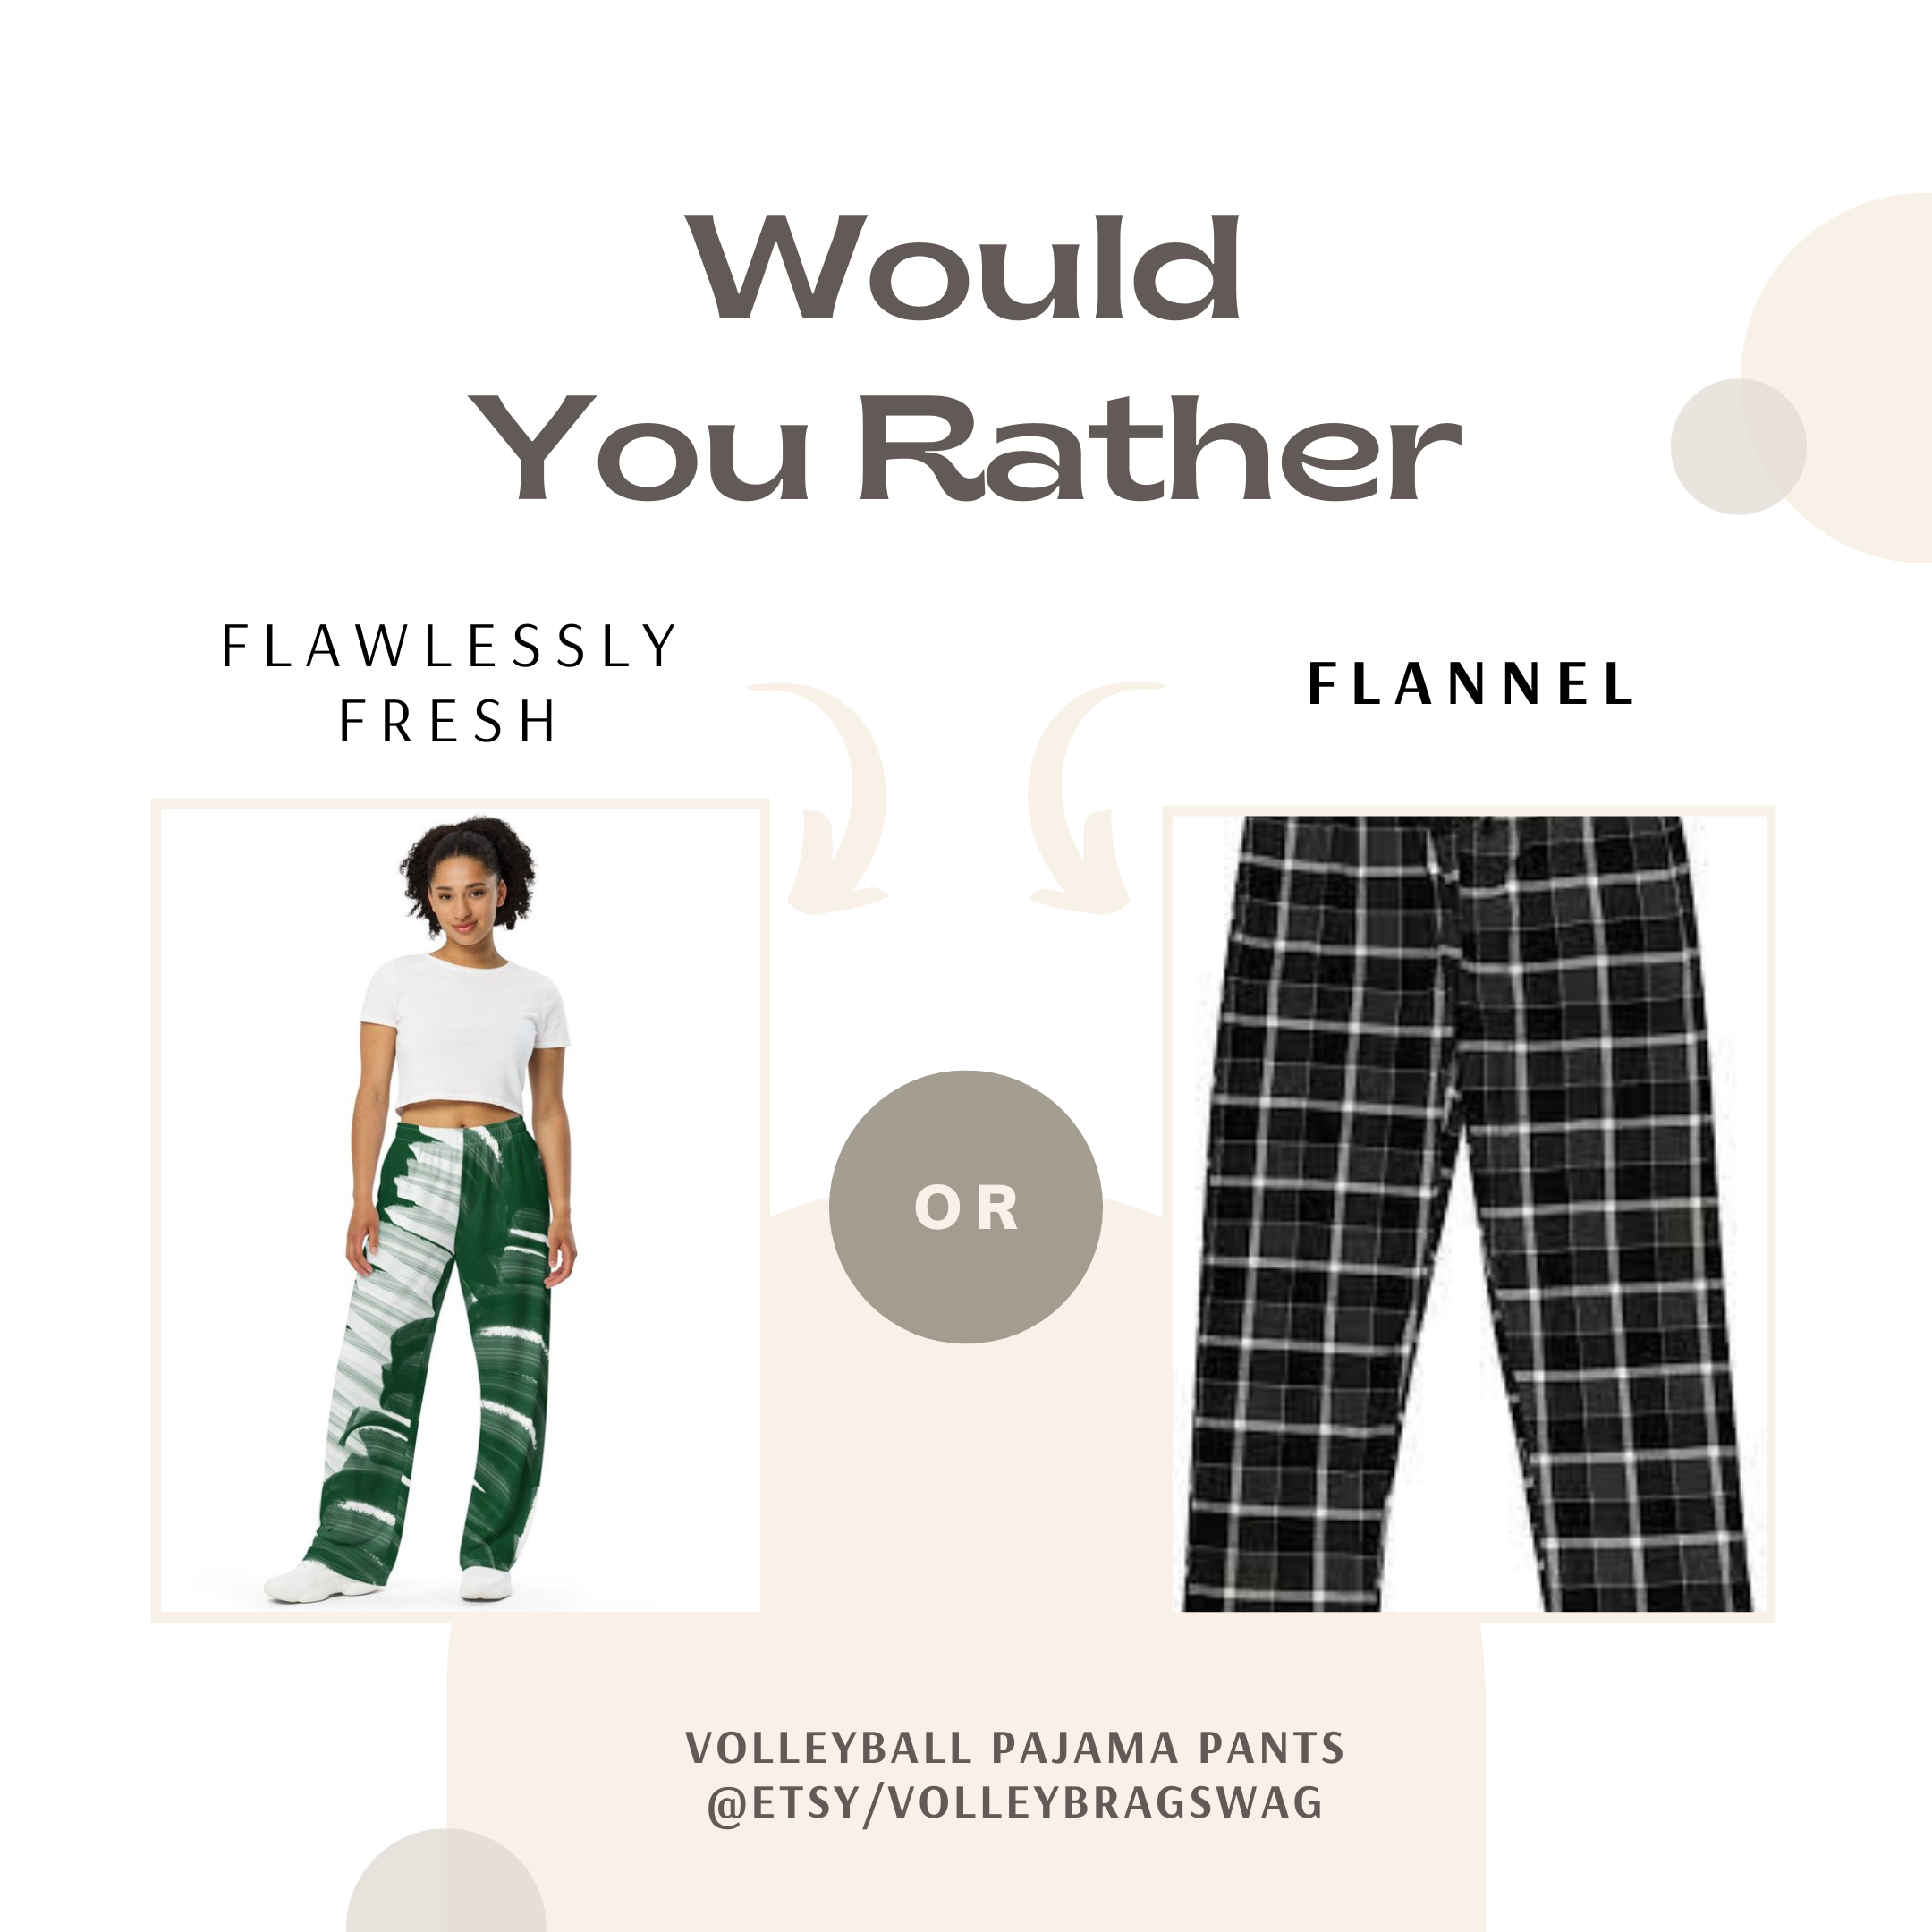 Say Good Bye To Frumpy Flannel Volleyball Pants And Say Hello To Fascinatingly Feisty Volleyball PJ Pants: These Pakistan flag inspired green and white wide leg lounge pants are available now on Etsy.